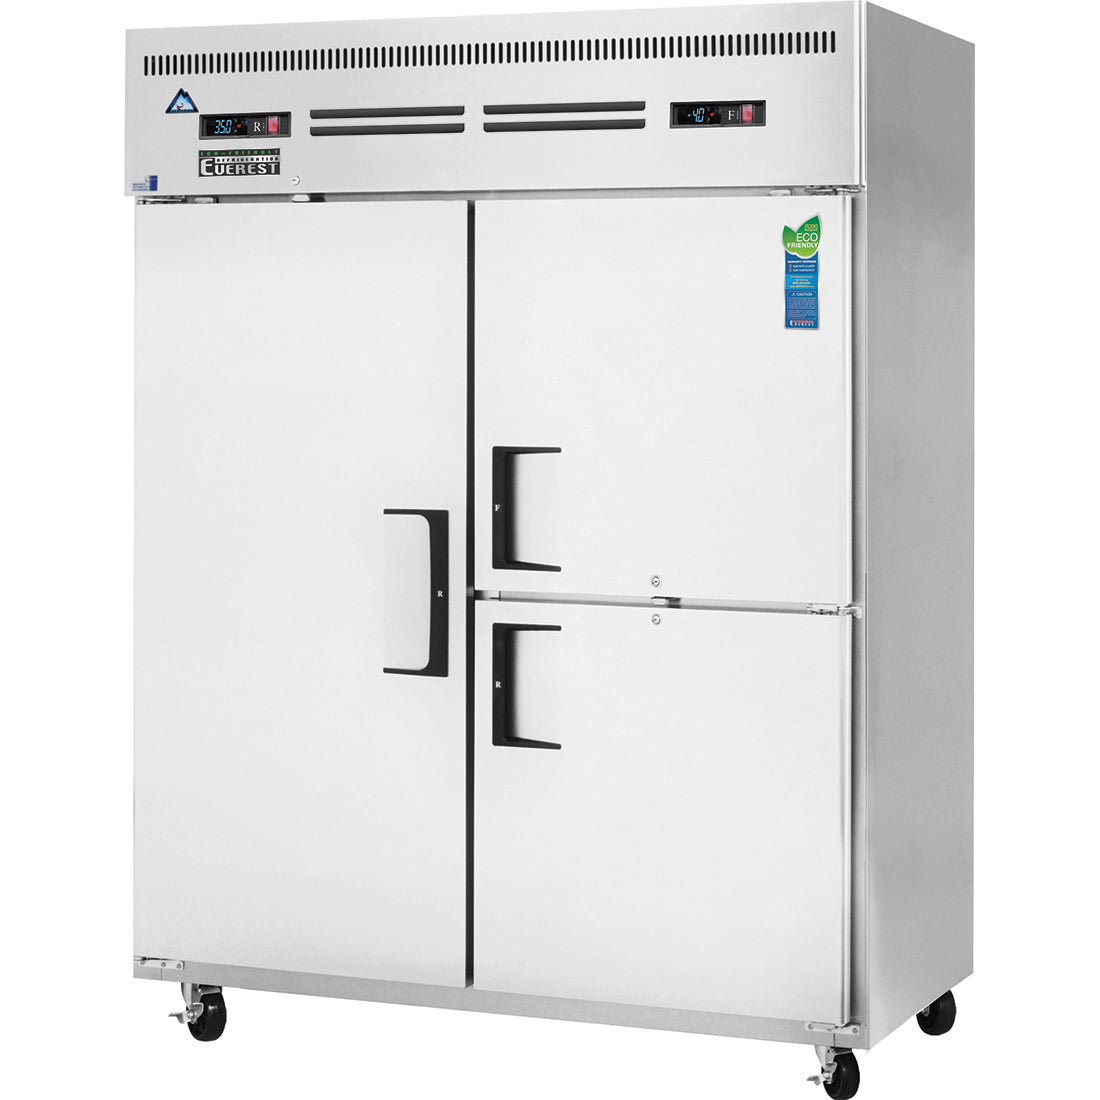 Everest ES Series-ESWQ3 Two Section Full/Half Door Upright Reach-In Dual Temp Refrigerator/Freezer Combo